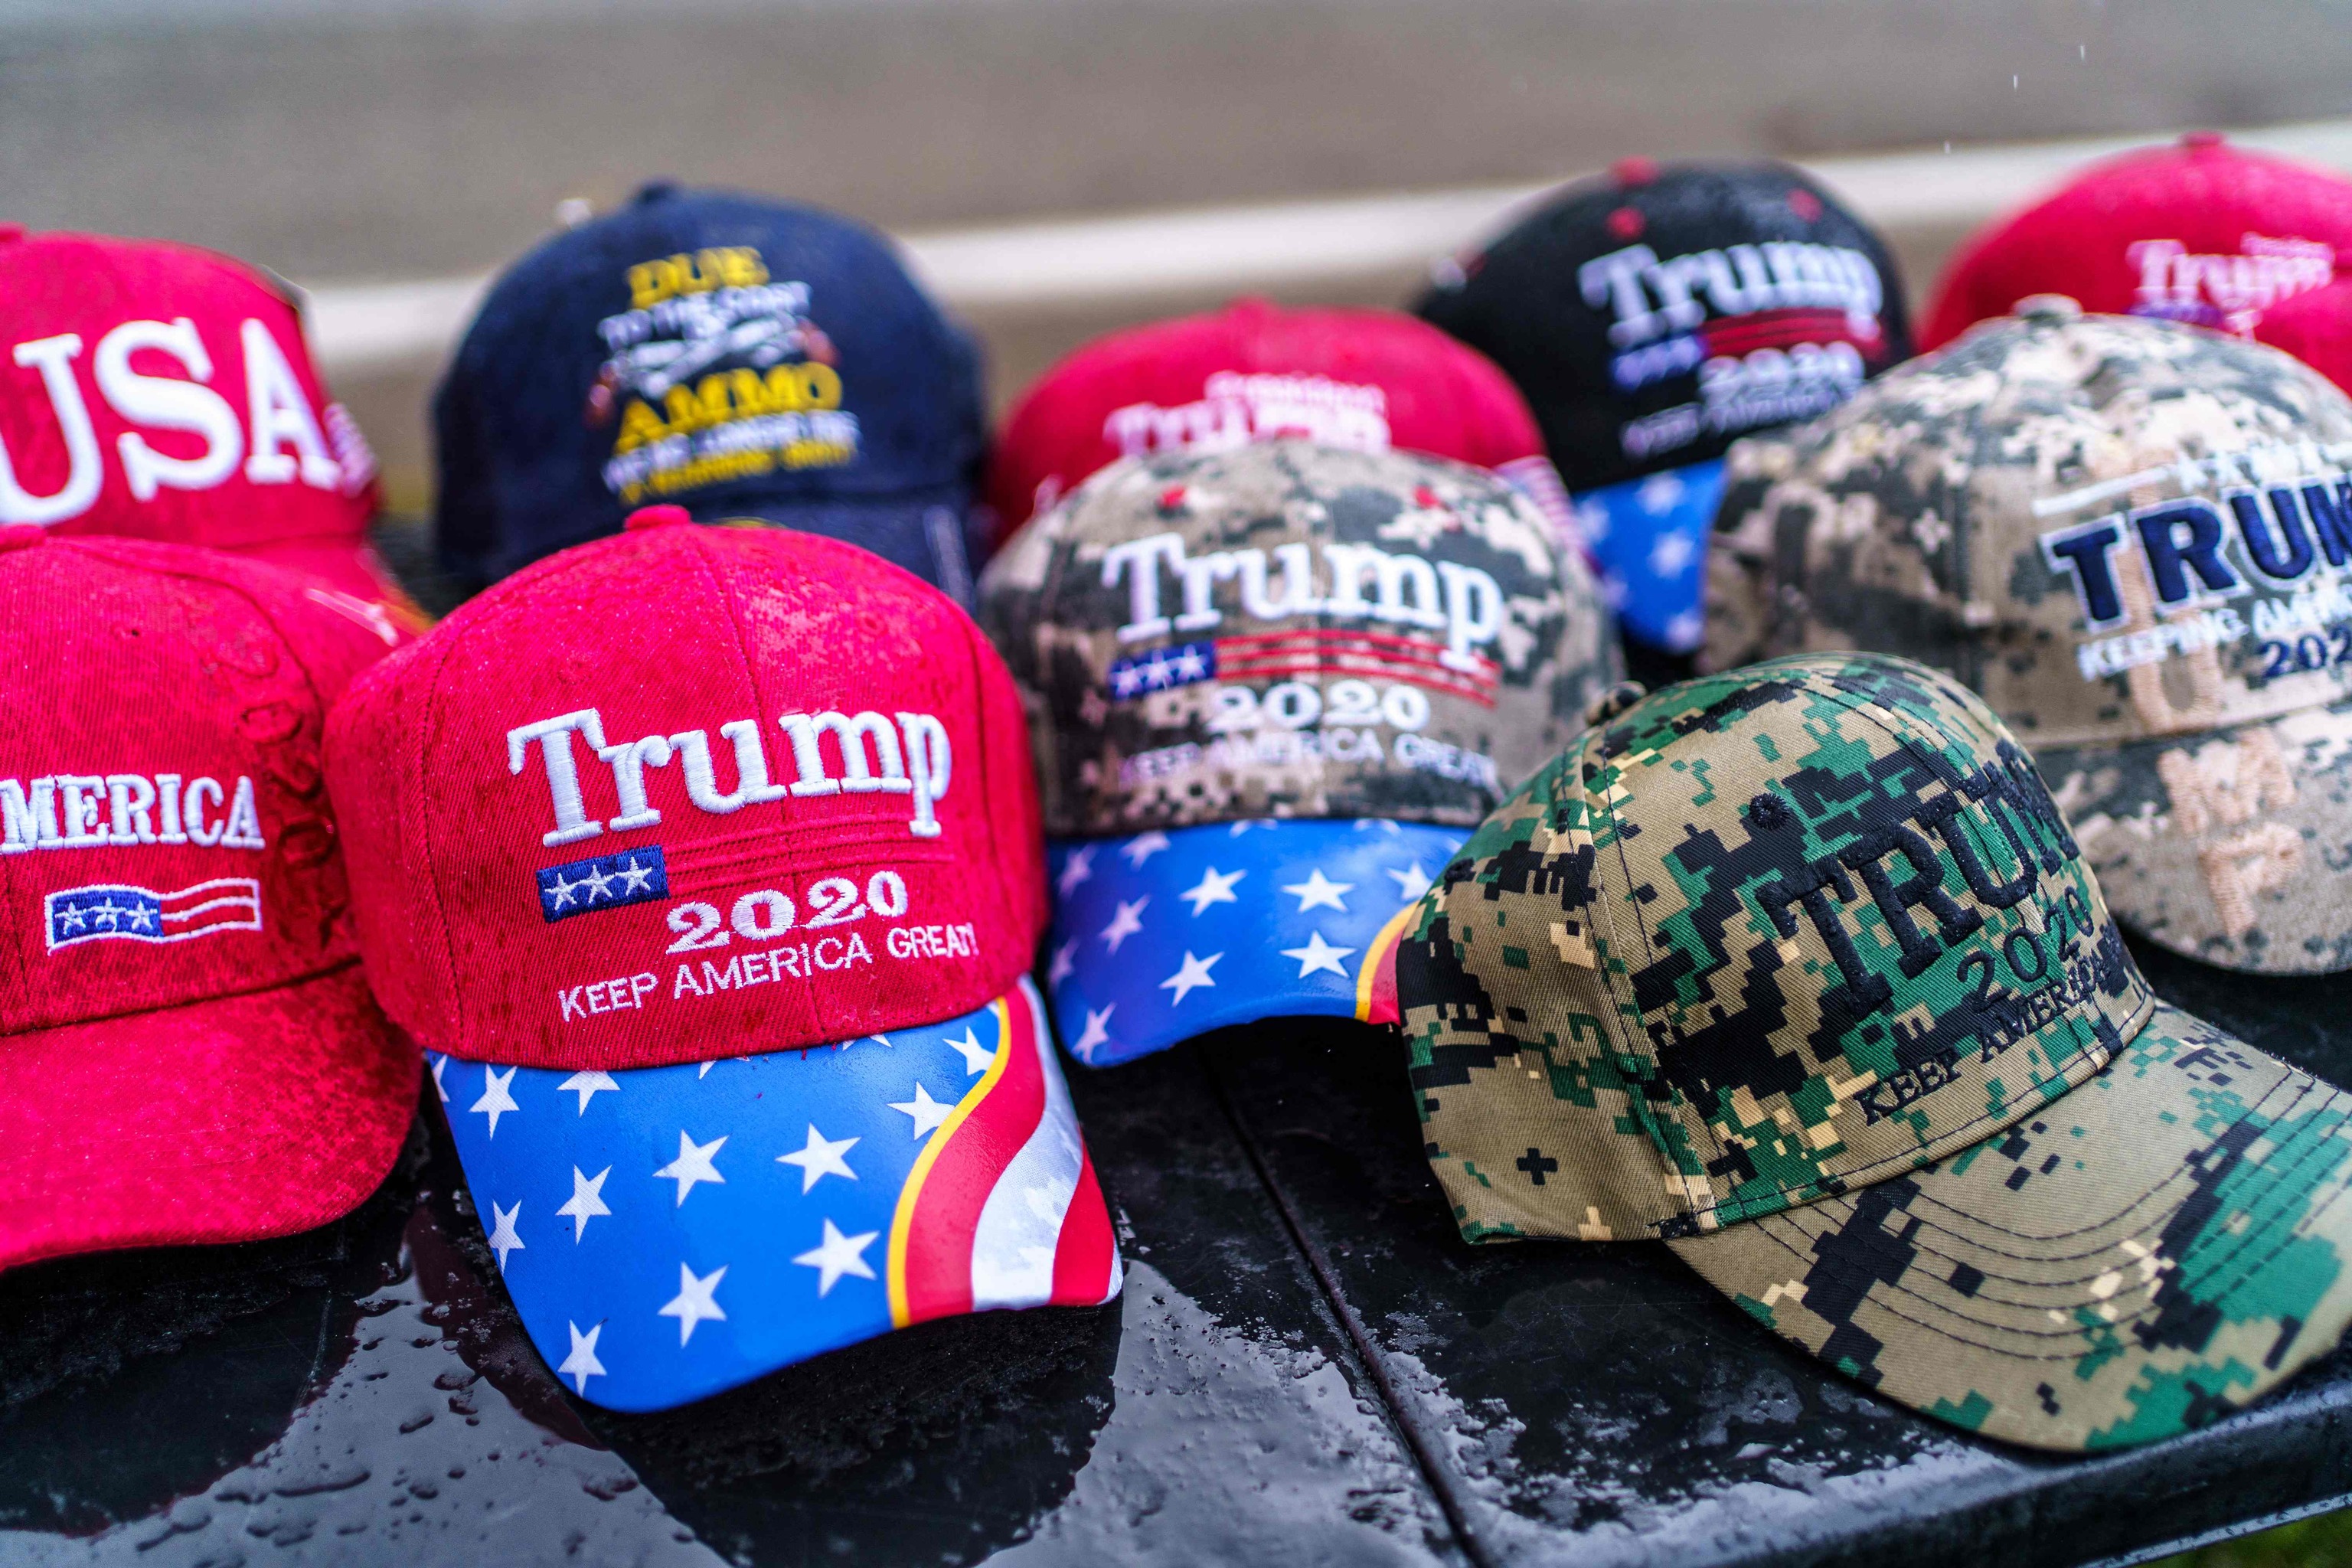 Merchandising in support of former US President Donald Trump.